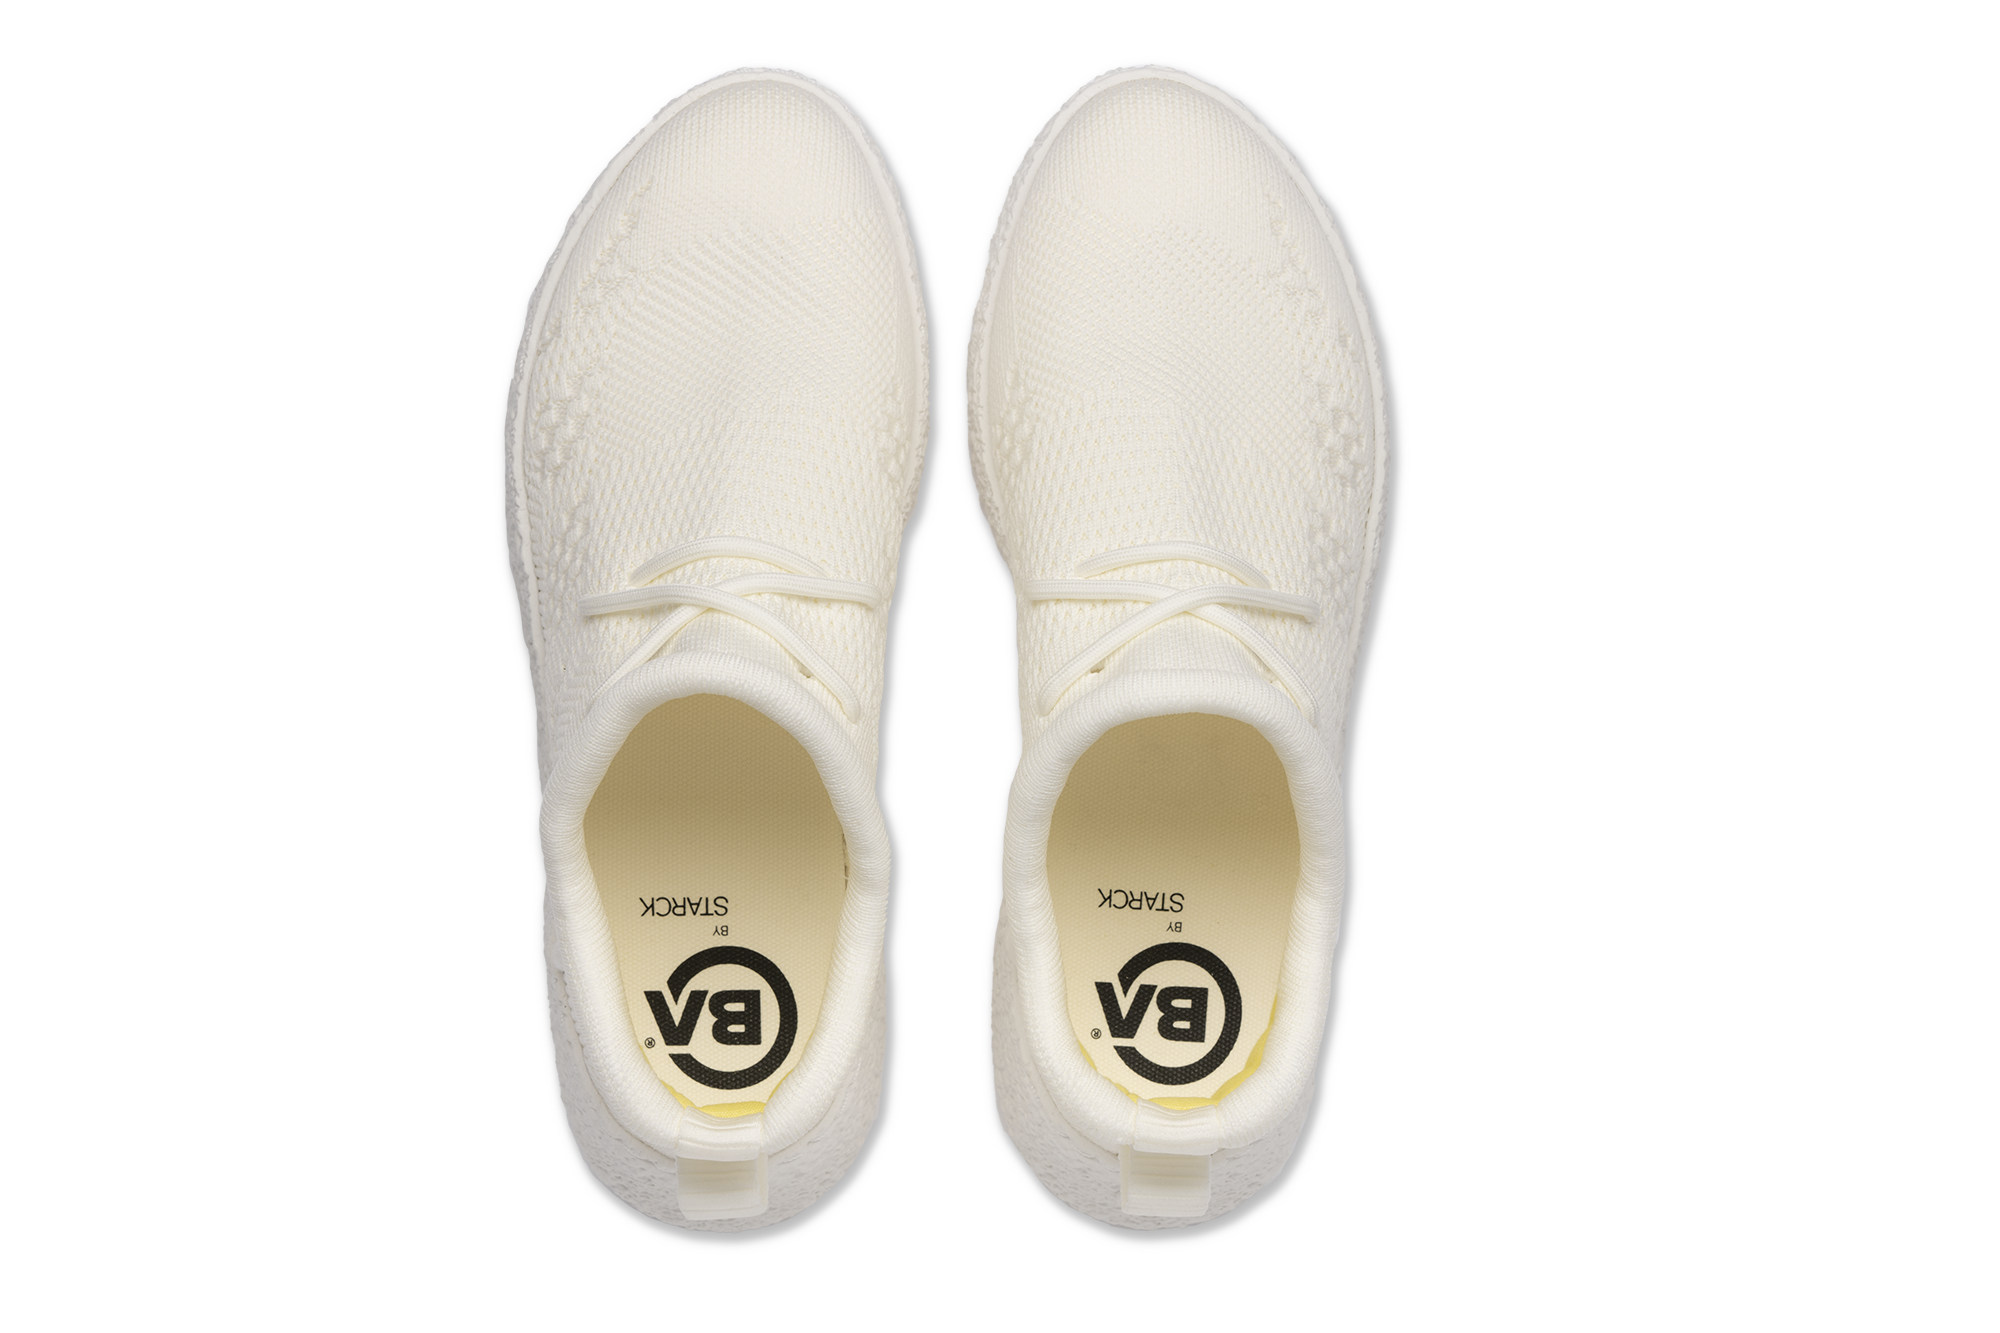 Full white Baliston Smart Shoe top view right and left